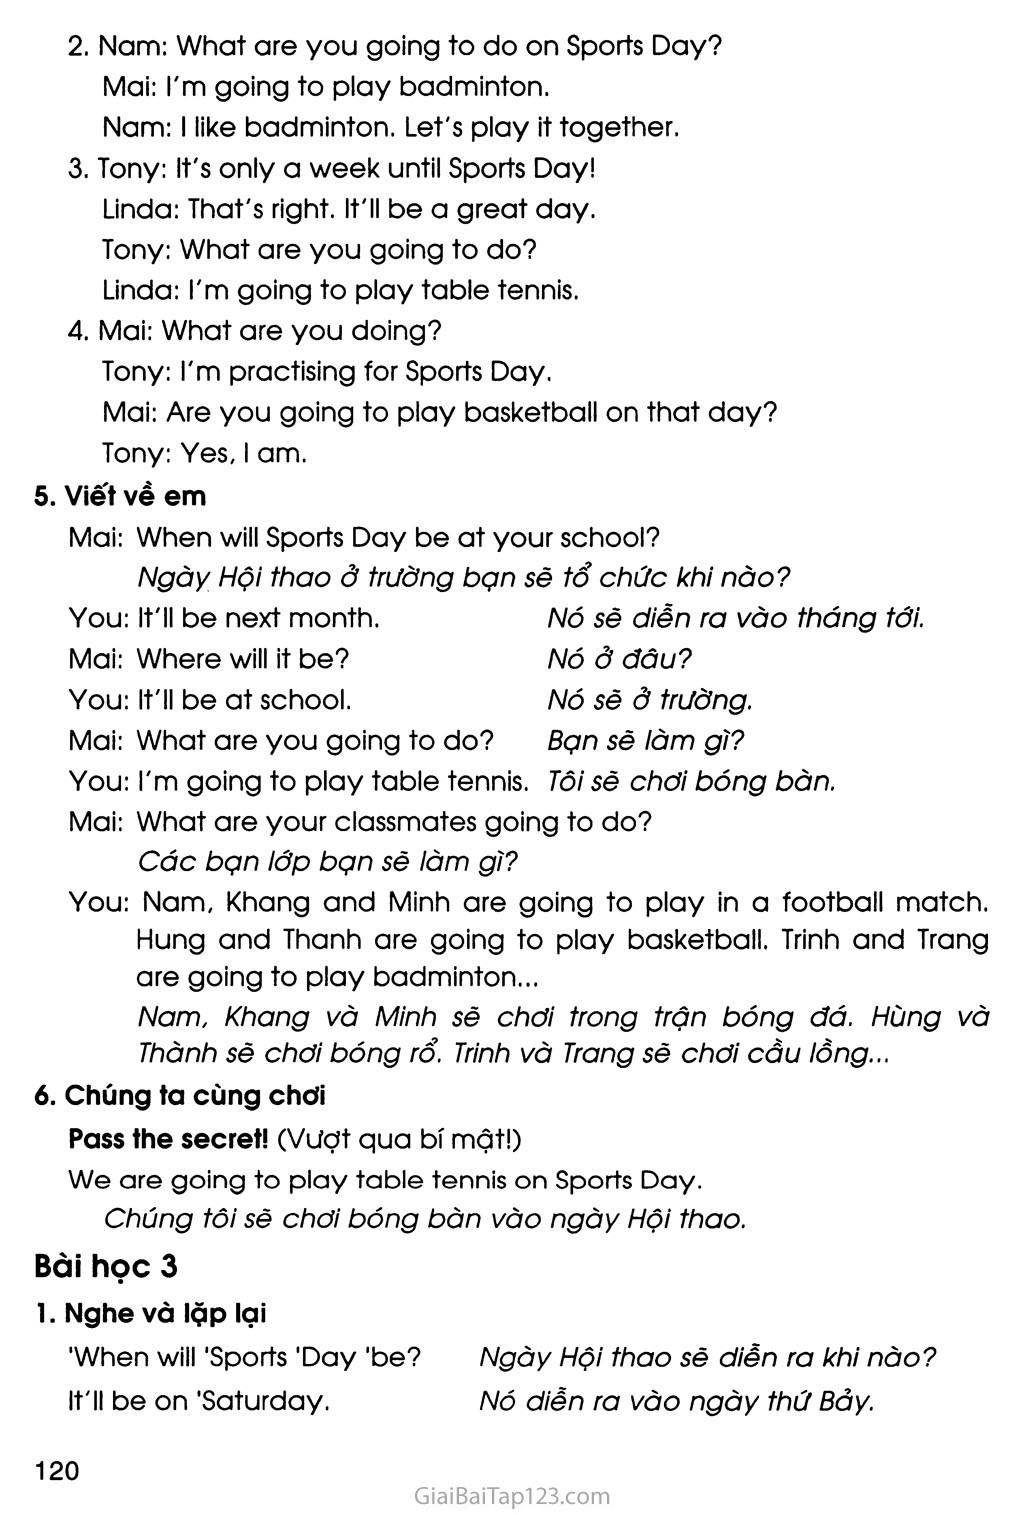 UNIT 10: WHEN WILL SPORTS DAY BE? trang 8